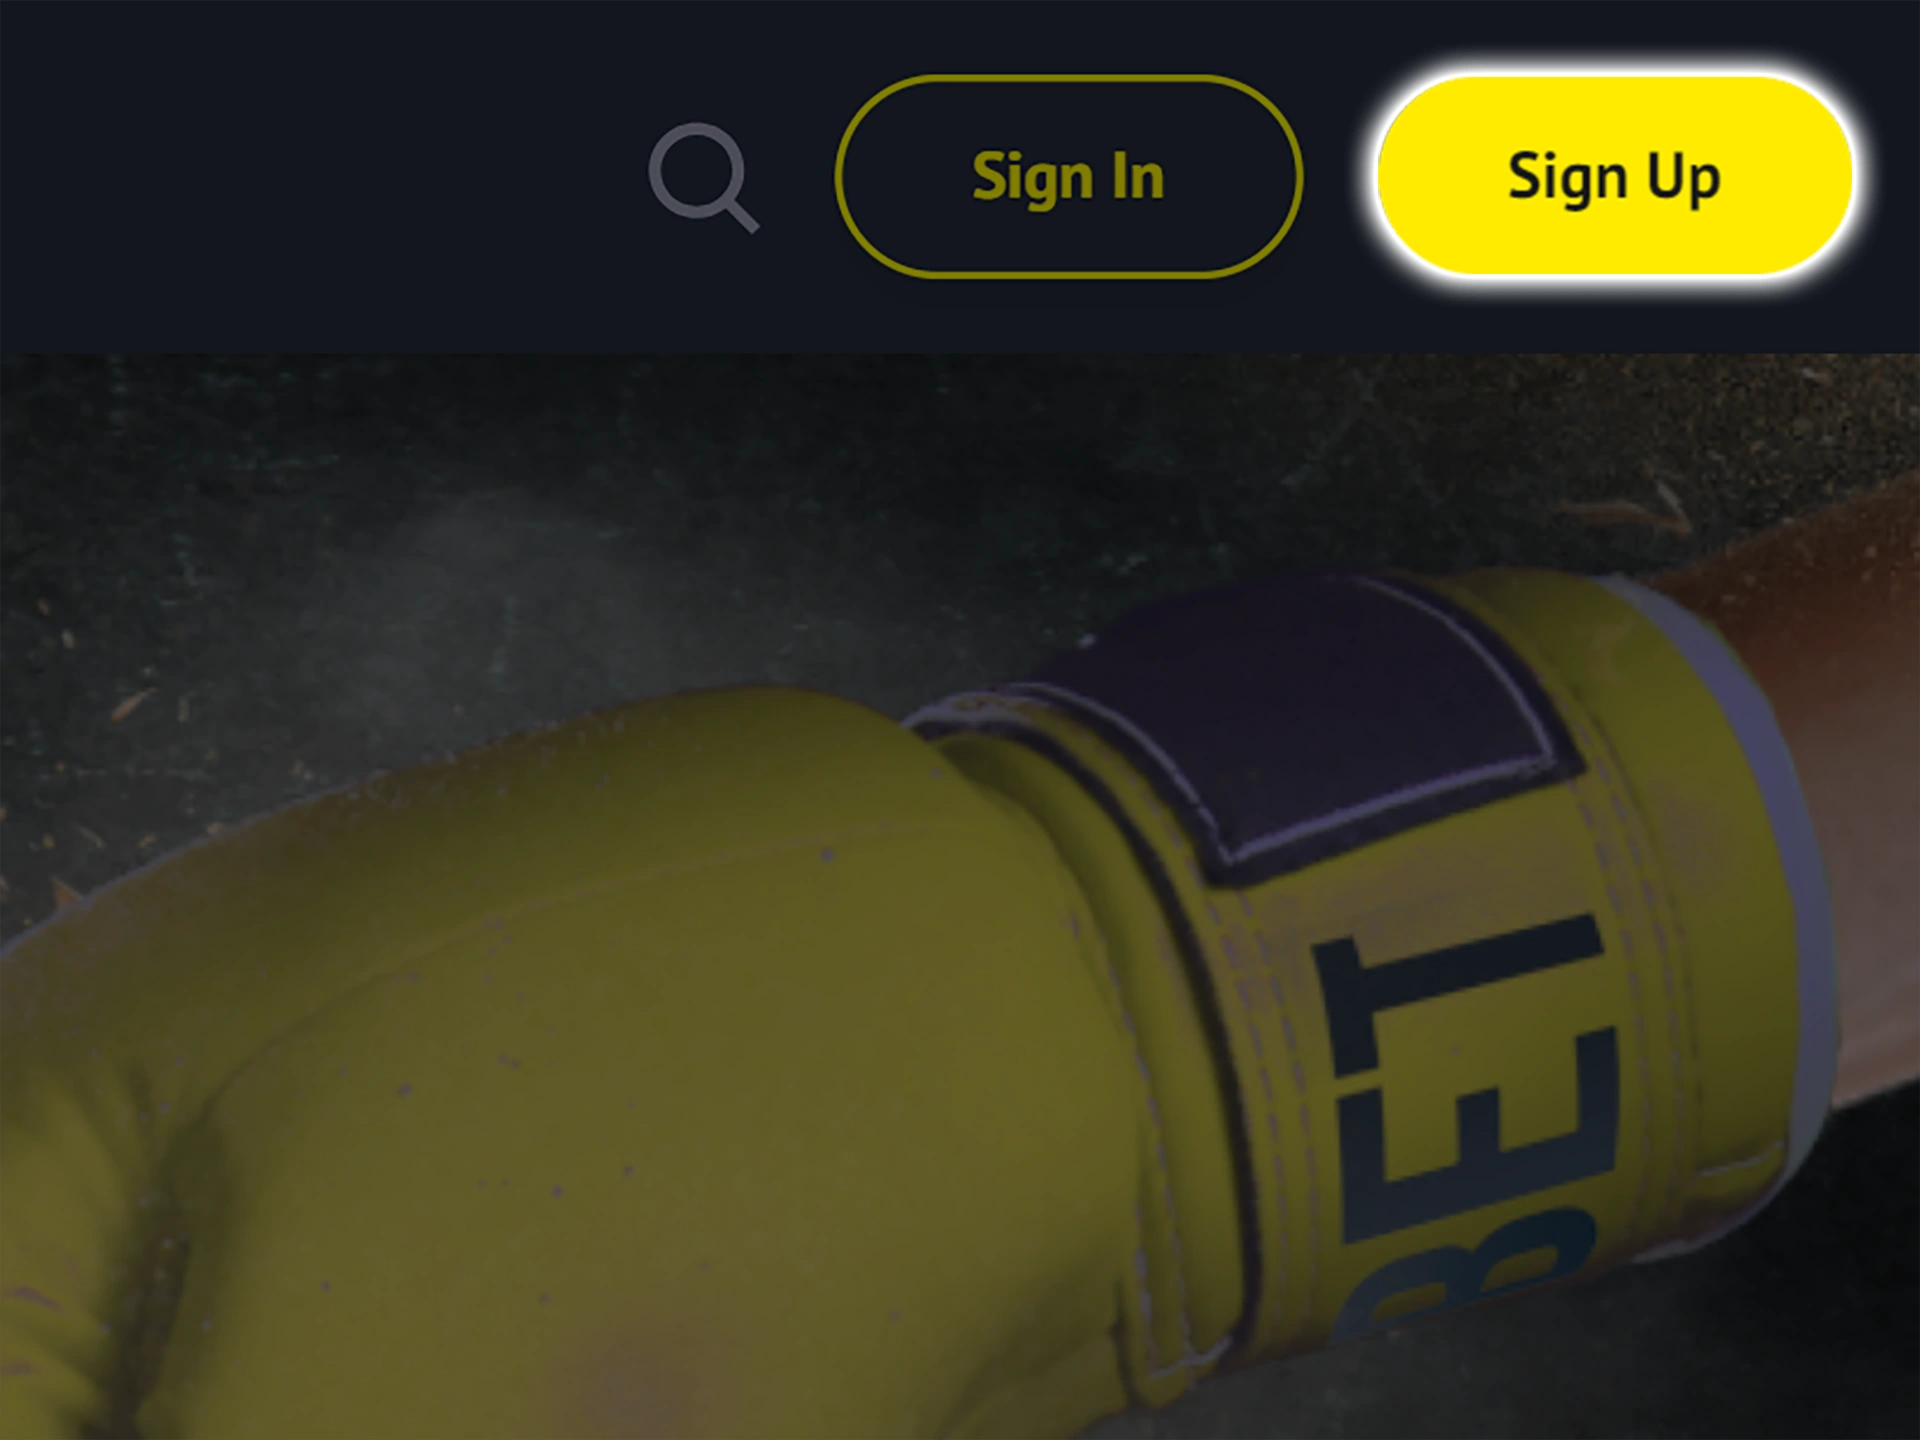 Start the registration process at Yonibet by using the sign up button.